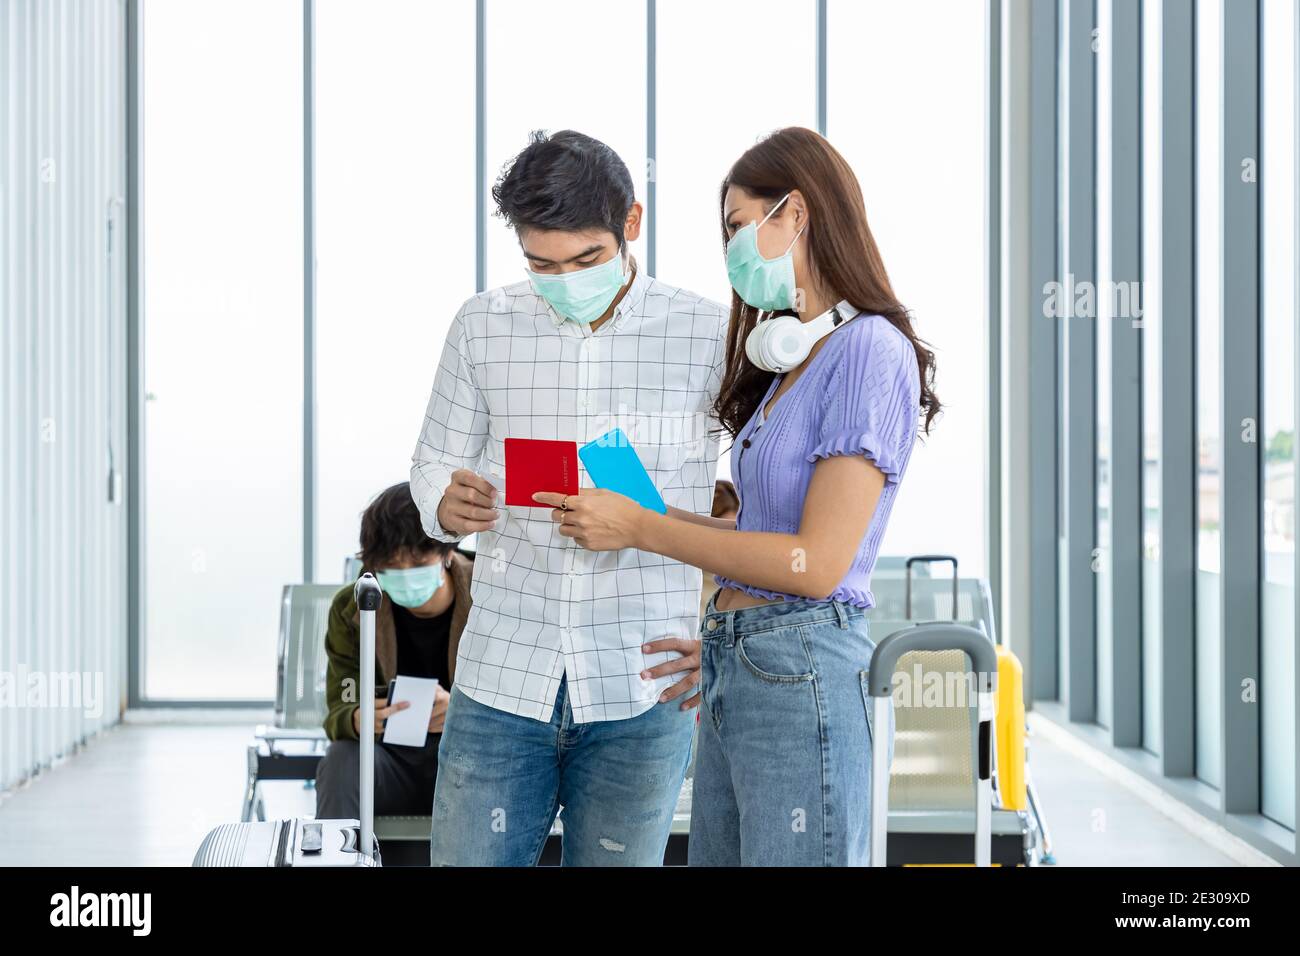 Couple travelers wearing protective mask in airport, during Covid-19 pandemic, with social distancing protocol. Holding passport and document preparin Stock Photo